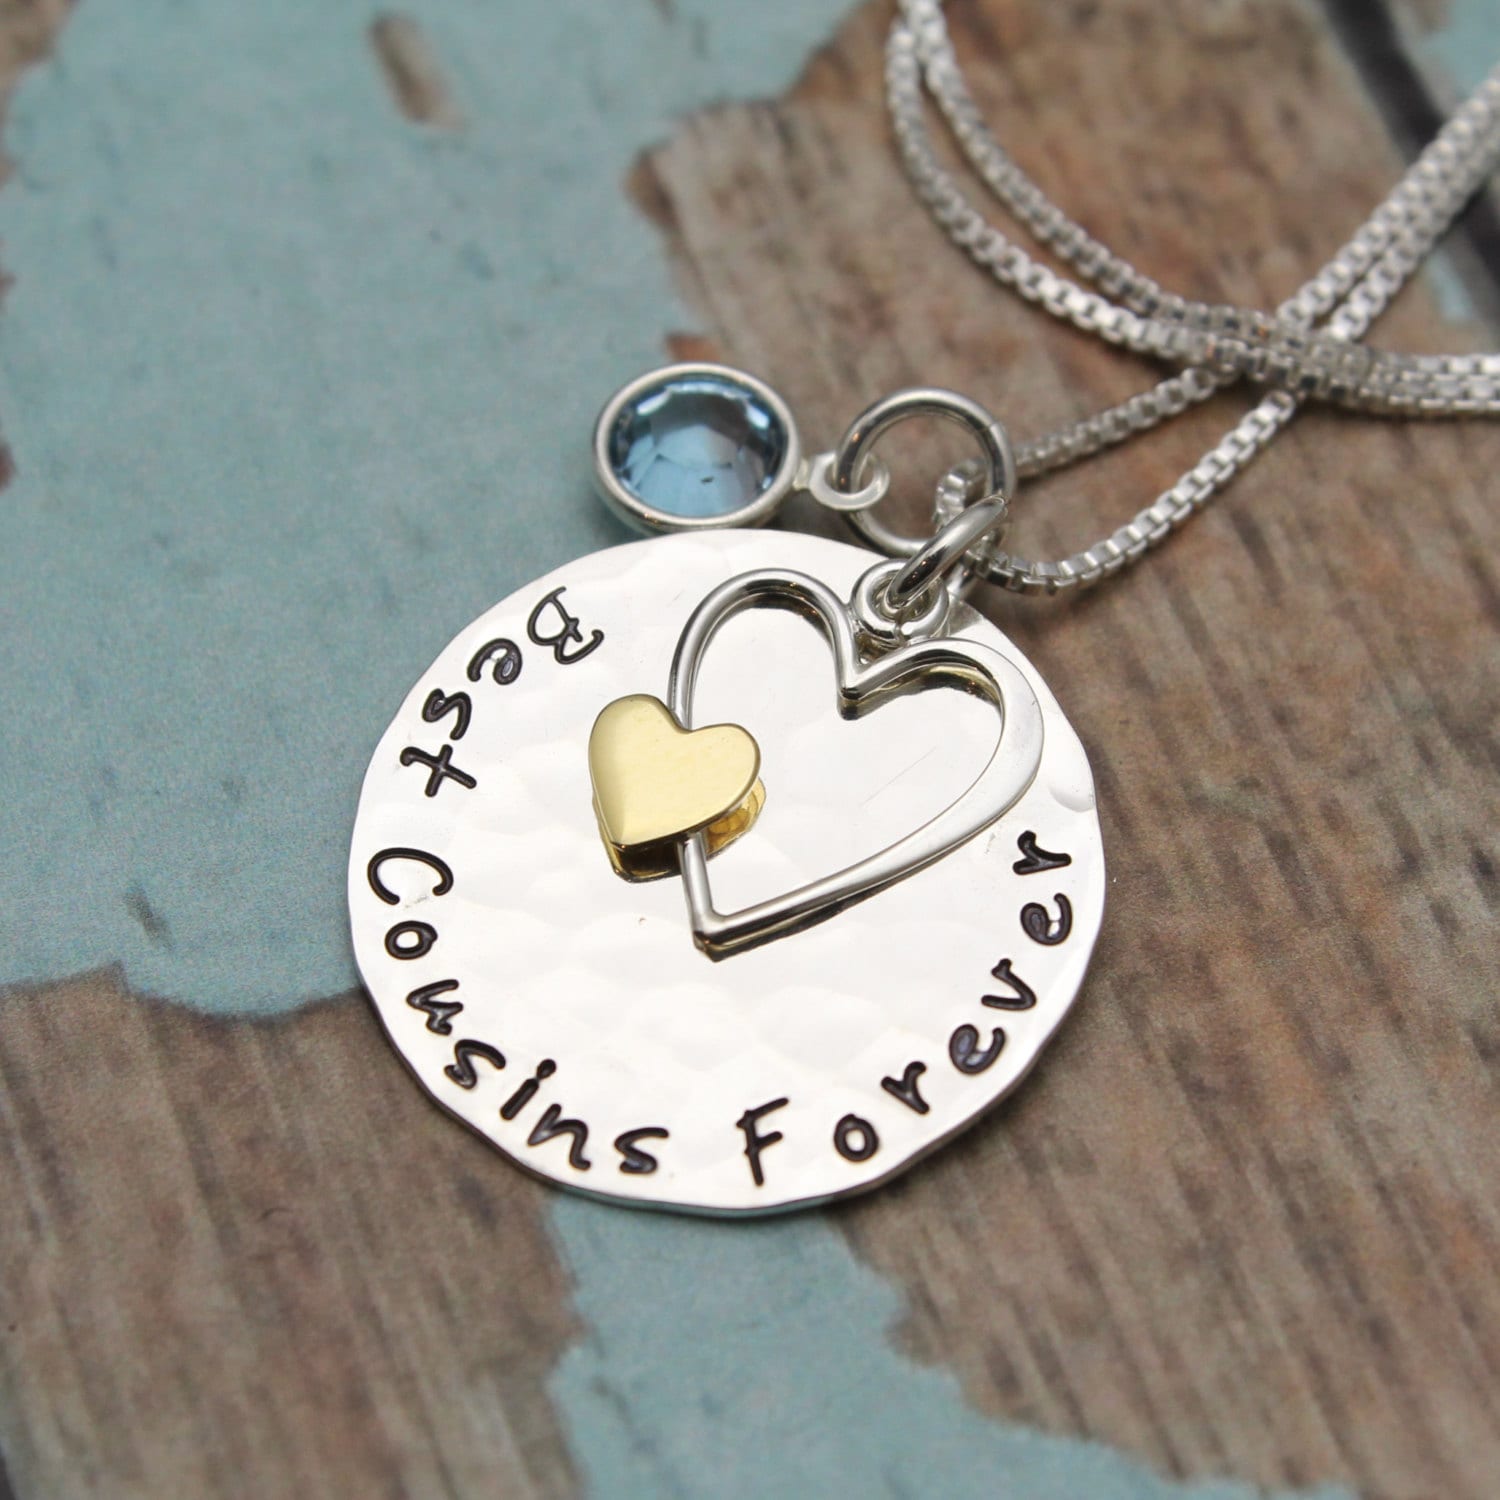 Best Cousins Forever Necklace, Cousins Gift, Cousins Necklace, Cousins Jewelry, Cousin Necklace, Hand Stamped Necklace, Cousin Necklace